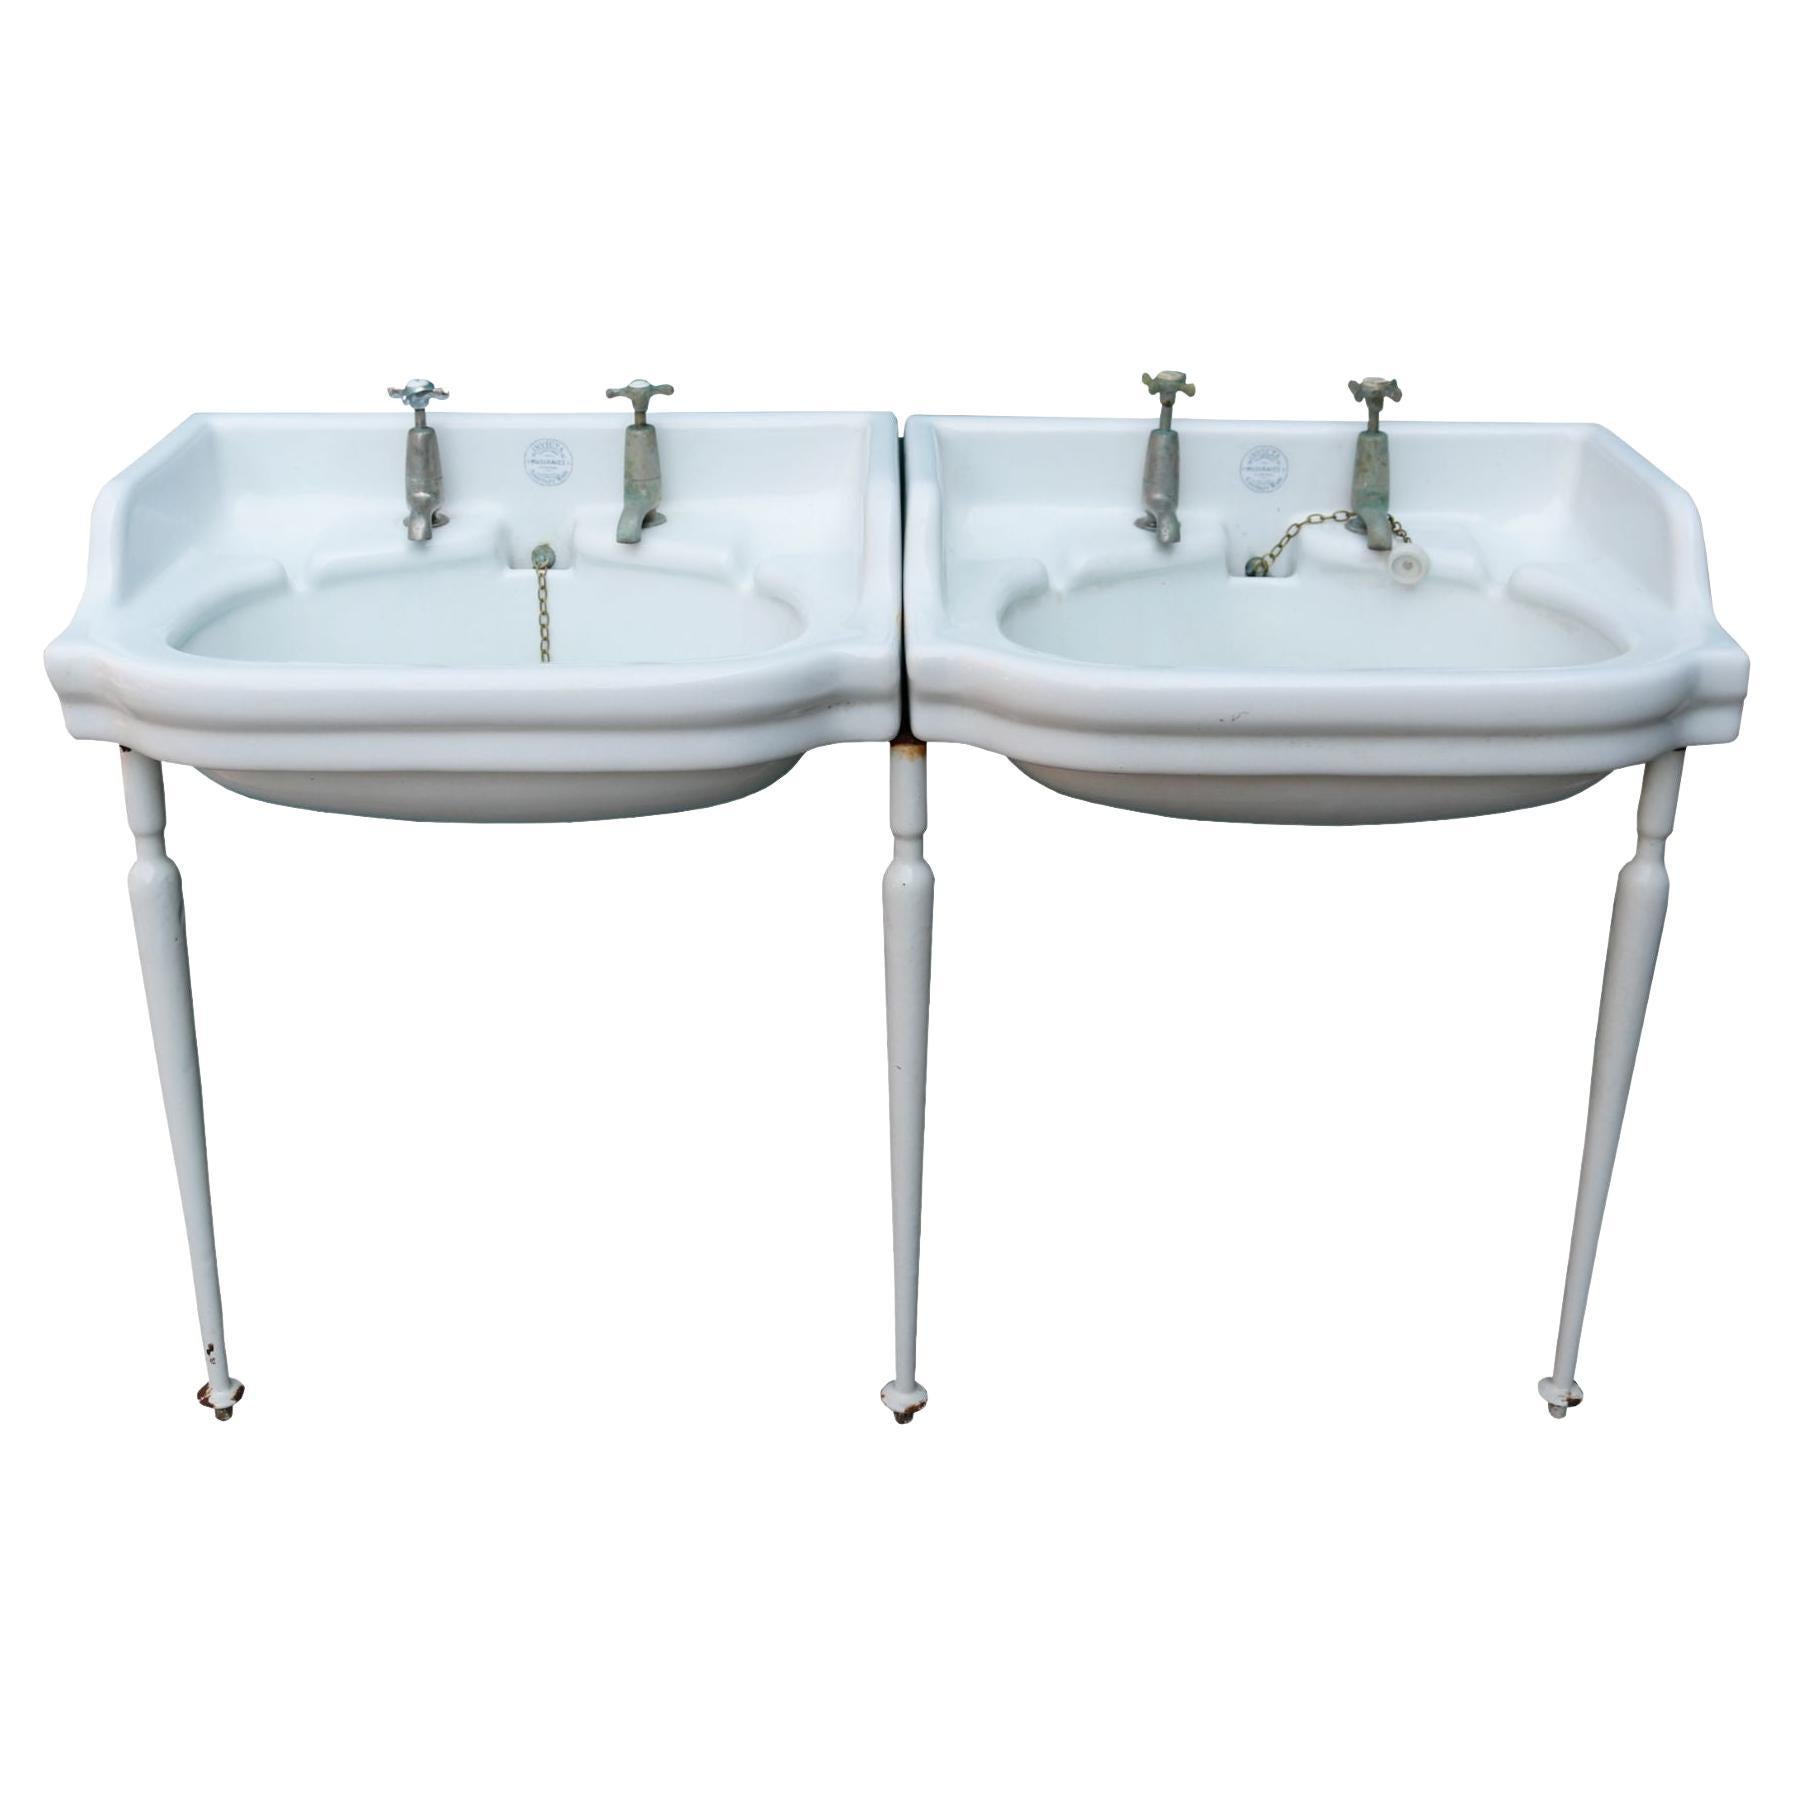 Antique Musgraves Invictus Double Basin on Stand For Sale